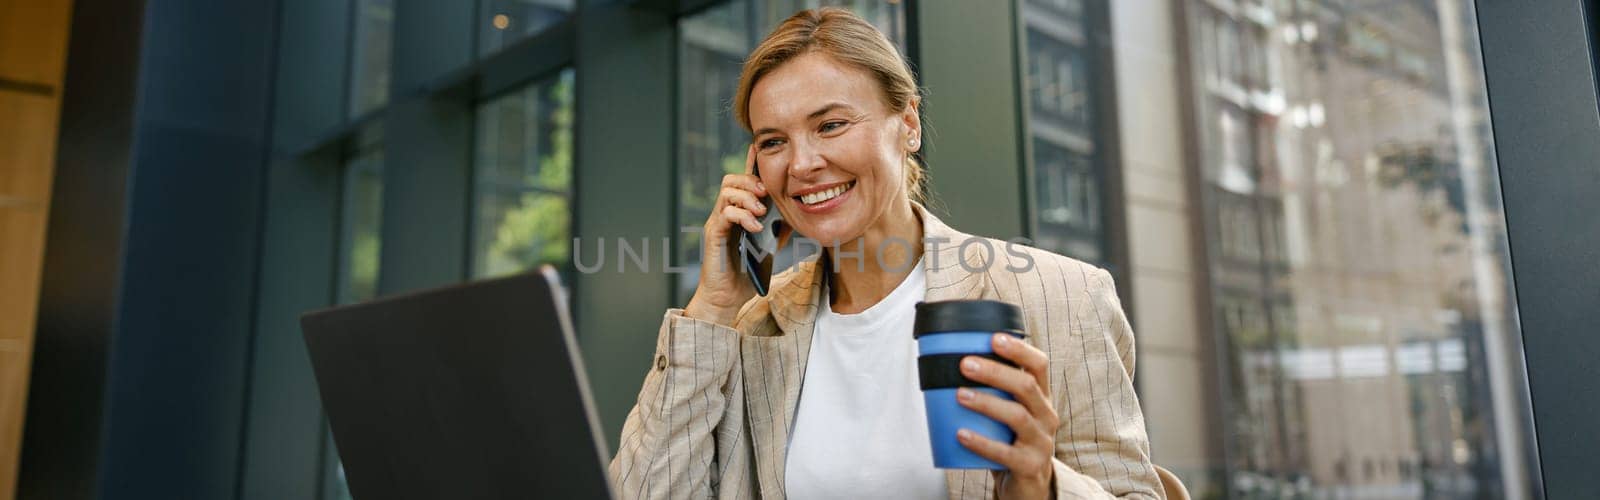 Smiling businesswoman talking on phone with client while working on laptop in office